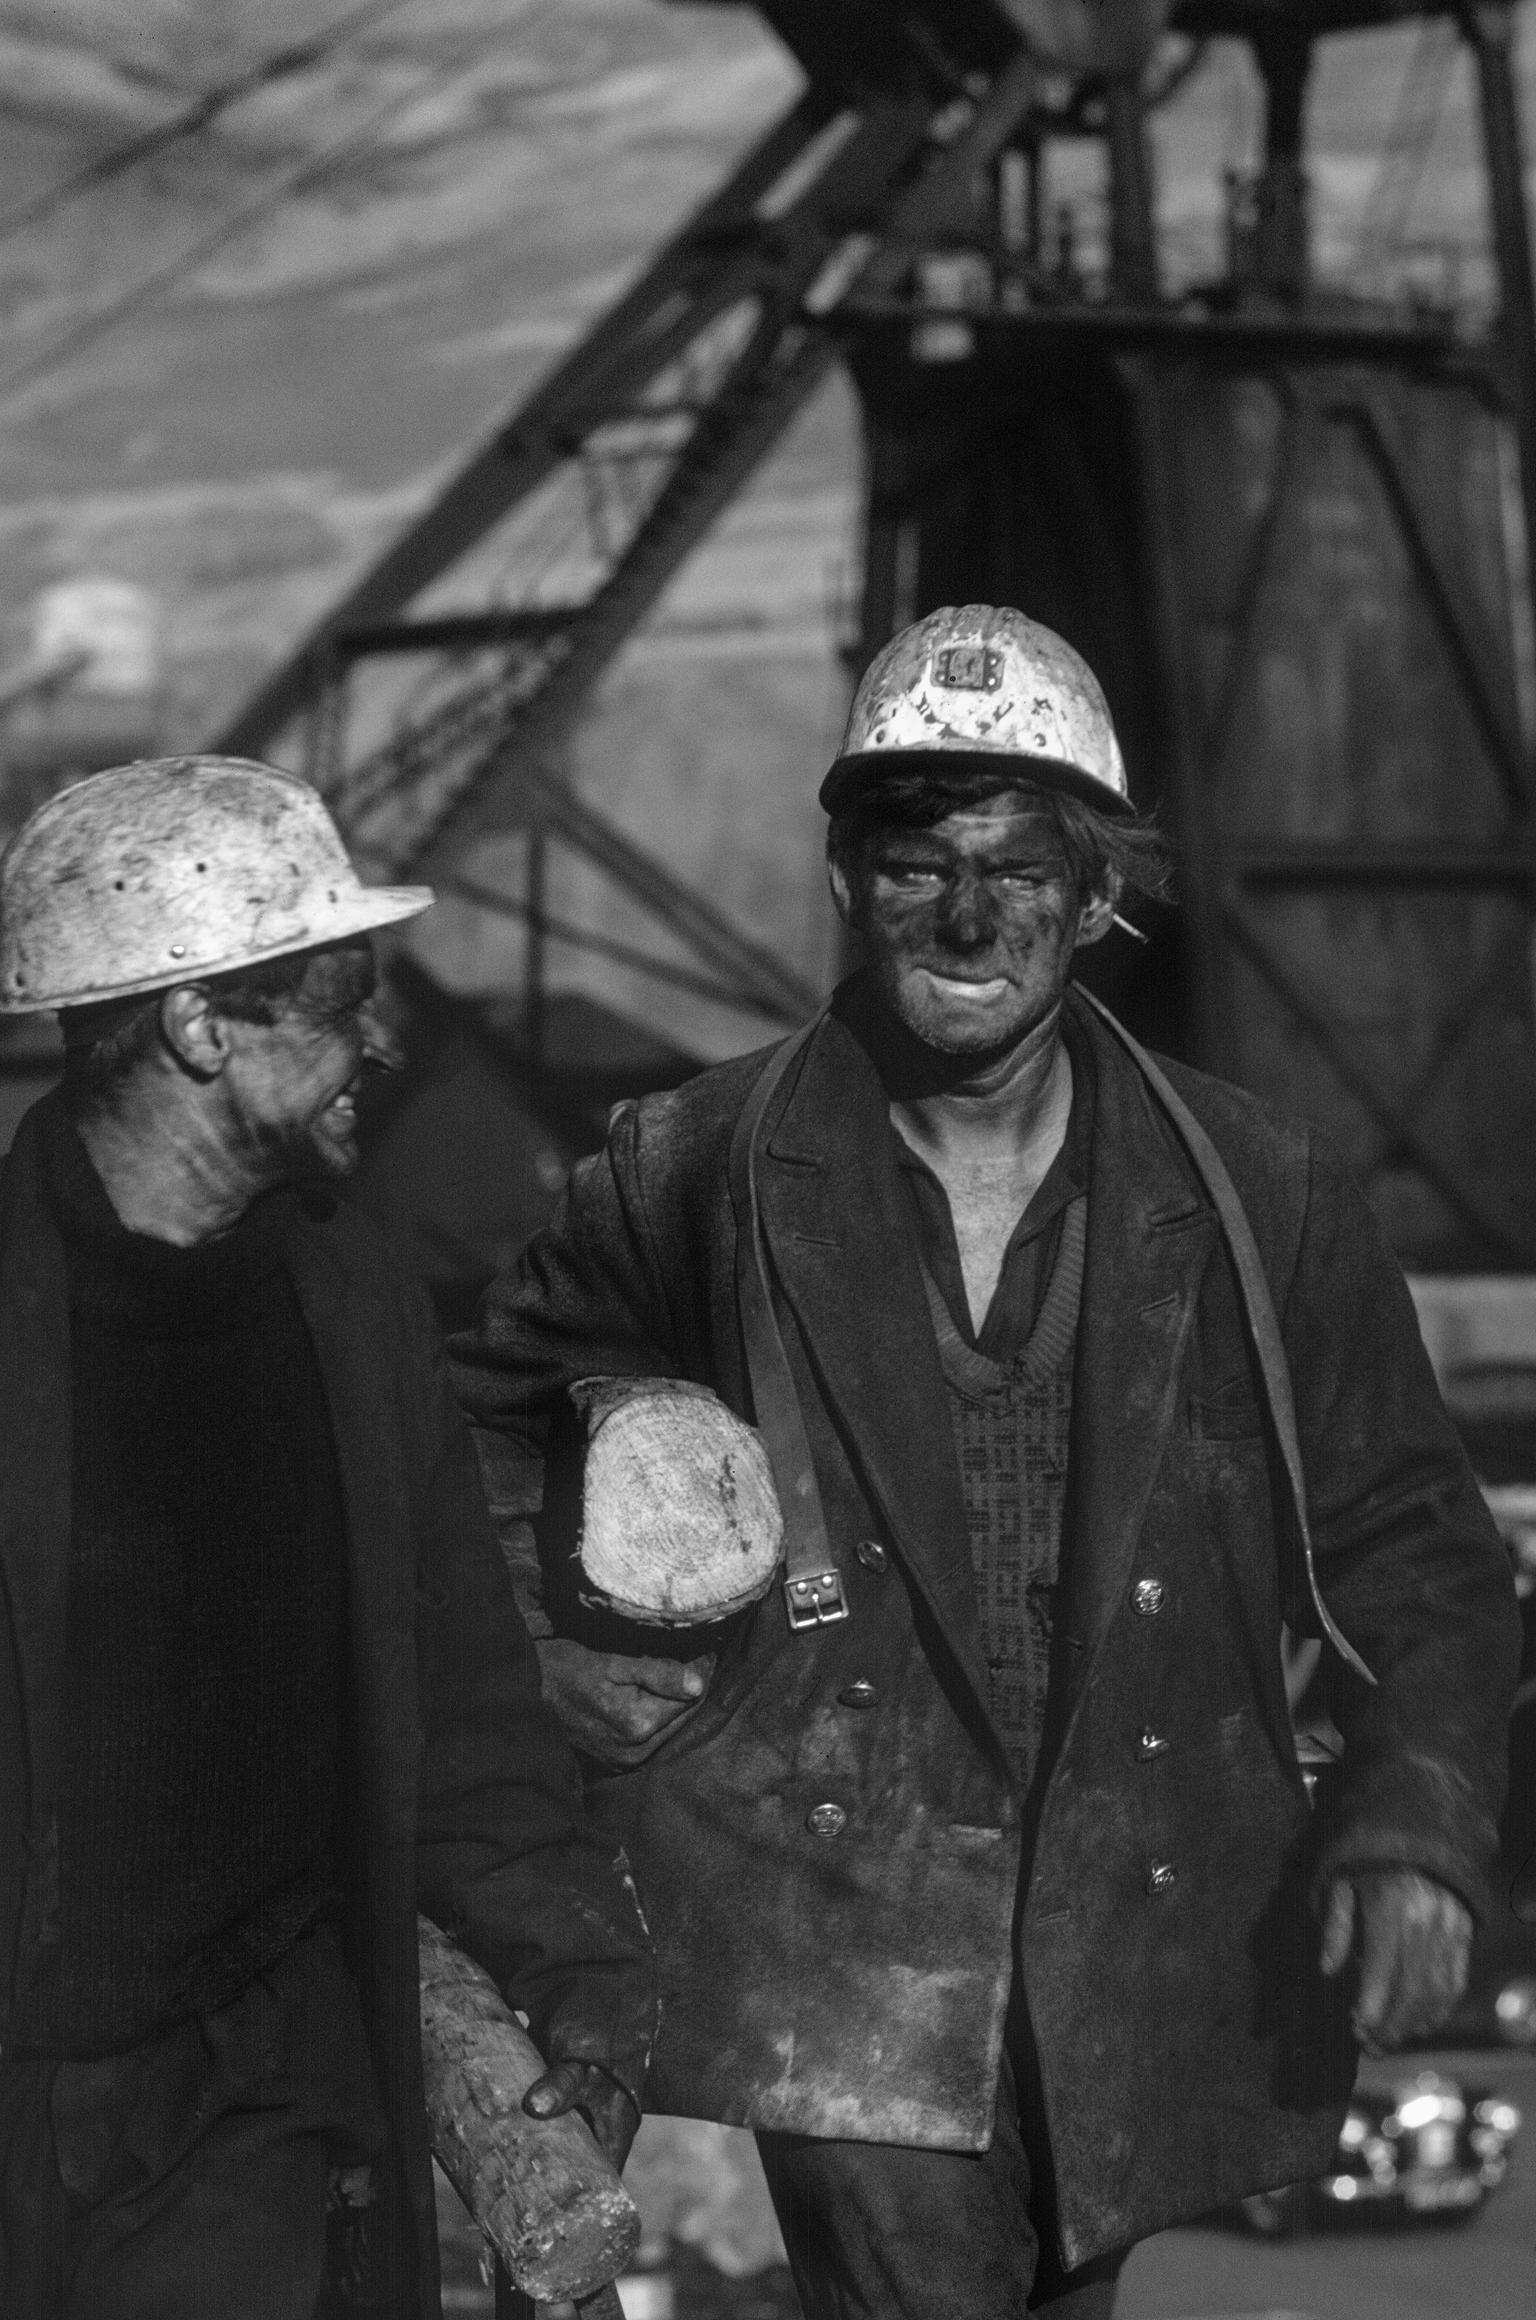 Miners at the end of their shift. Rhondda Valley, Wales